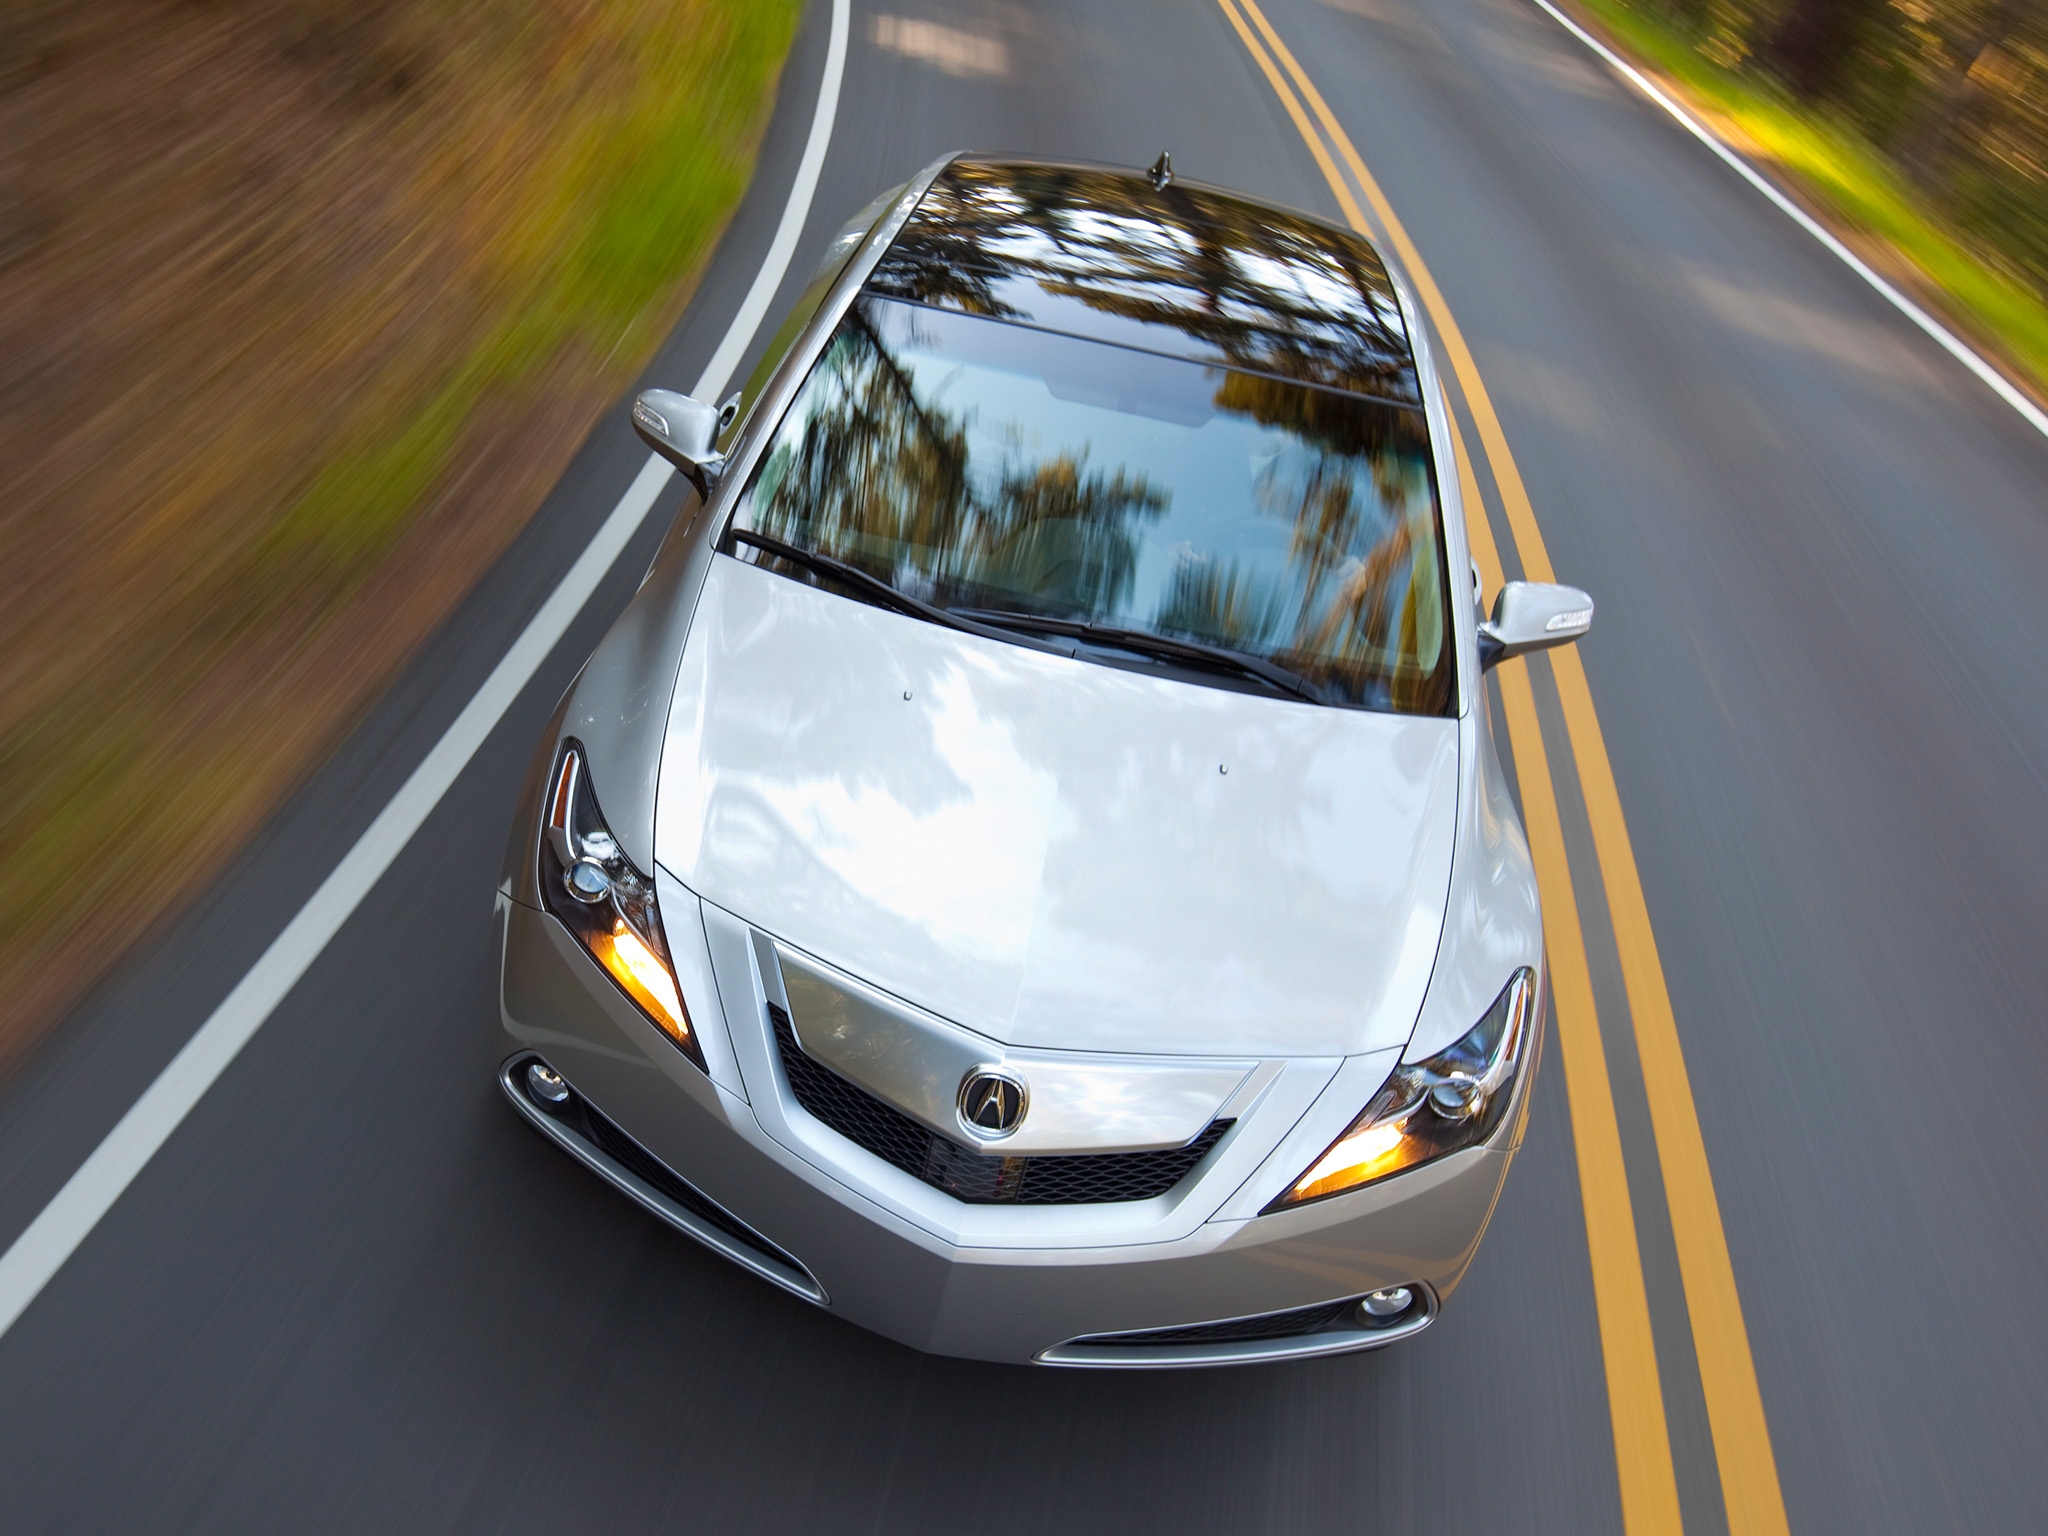 cars, auto, grass, acura, view from above, asphalt, speed, style, akura, zdx, 2009, silver metallic iphone wallpaper